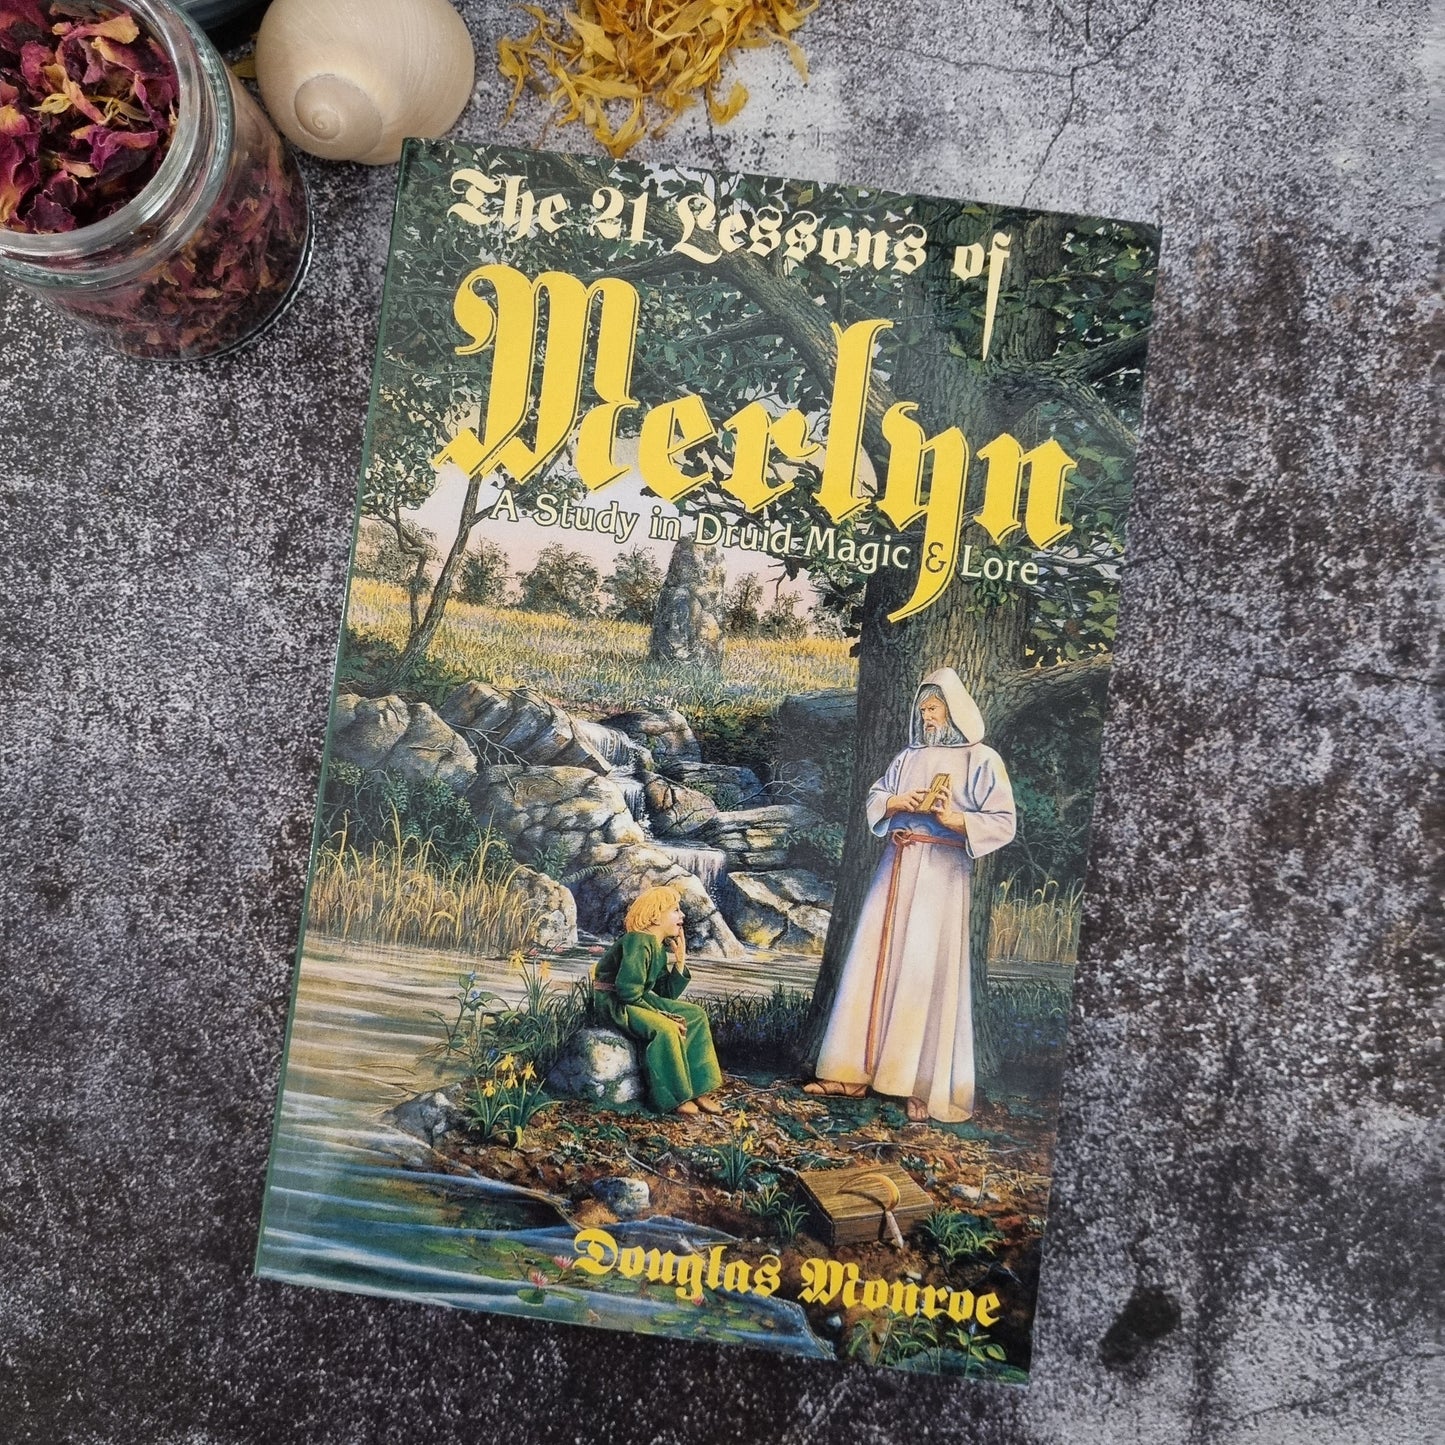 21 Lessons of Merlyn: A Study in Druid Magic & Lore